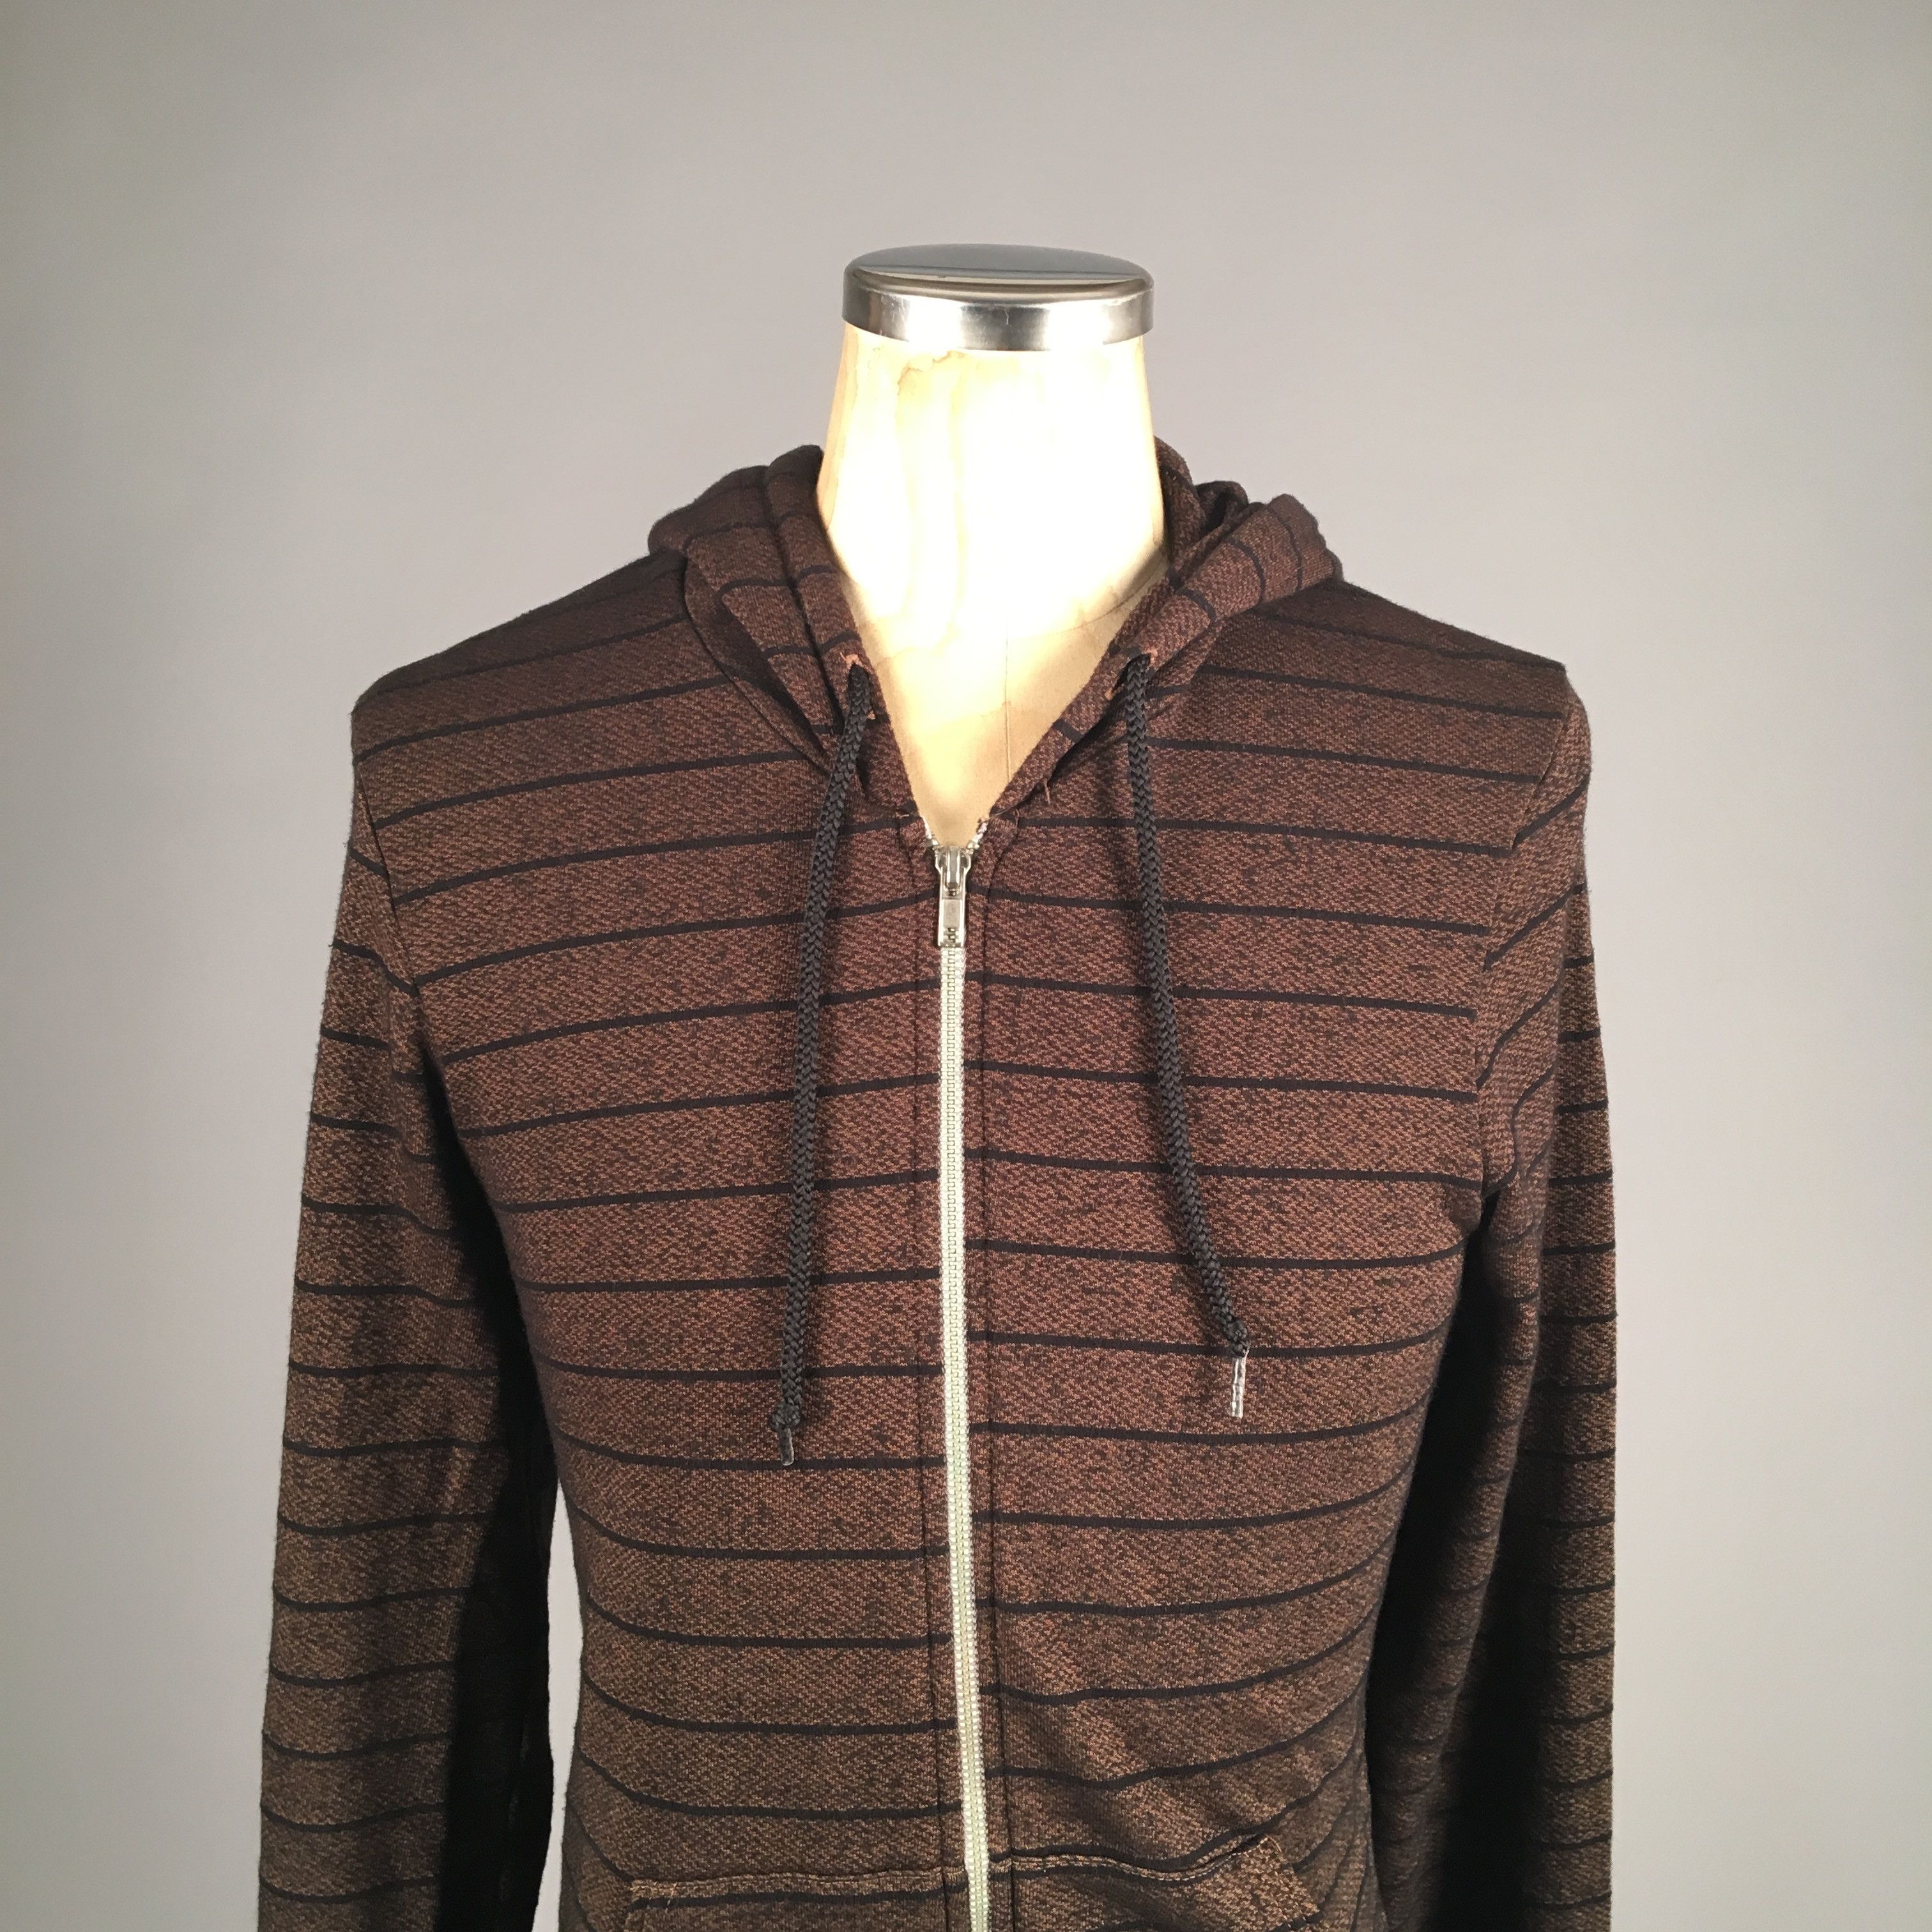 American Apparel BROWN STRIPED ZIP-UP HOODIE Size US M / EU 48-50 / 2 - 1 Preview